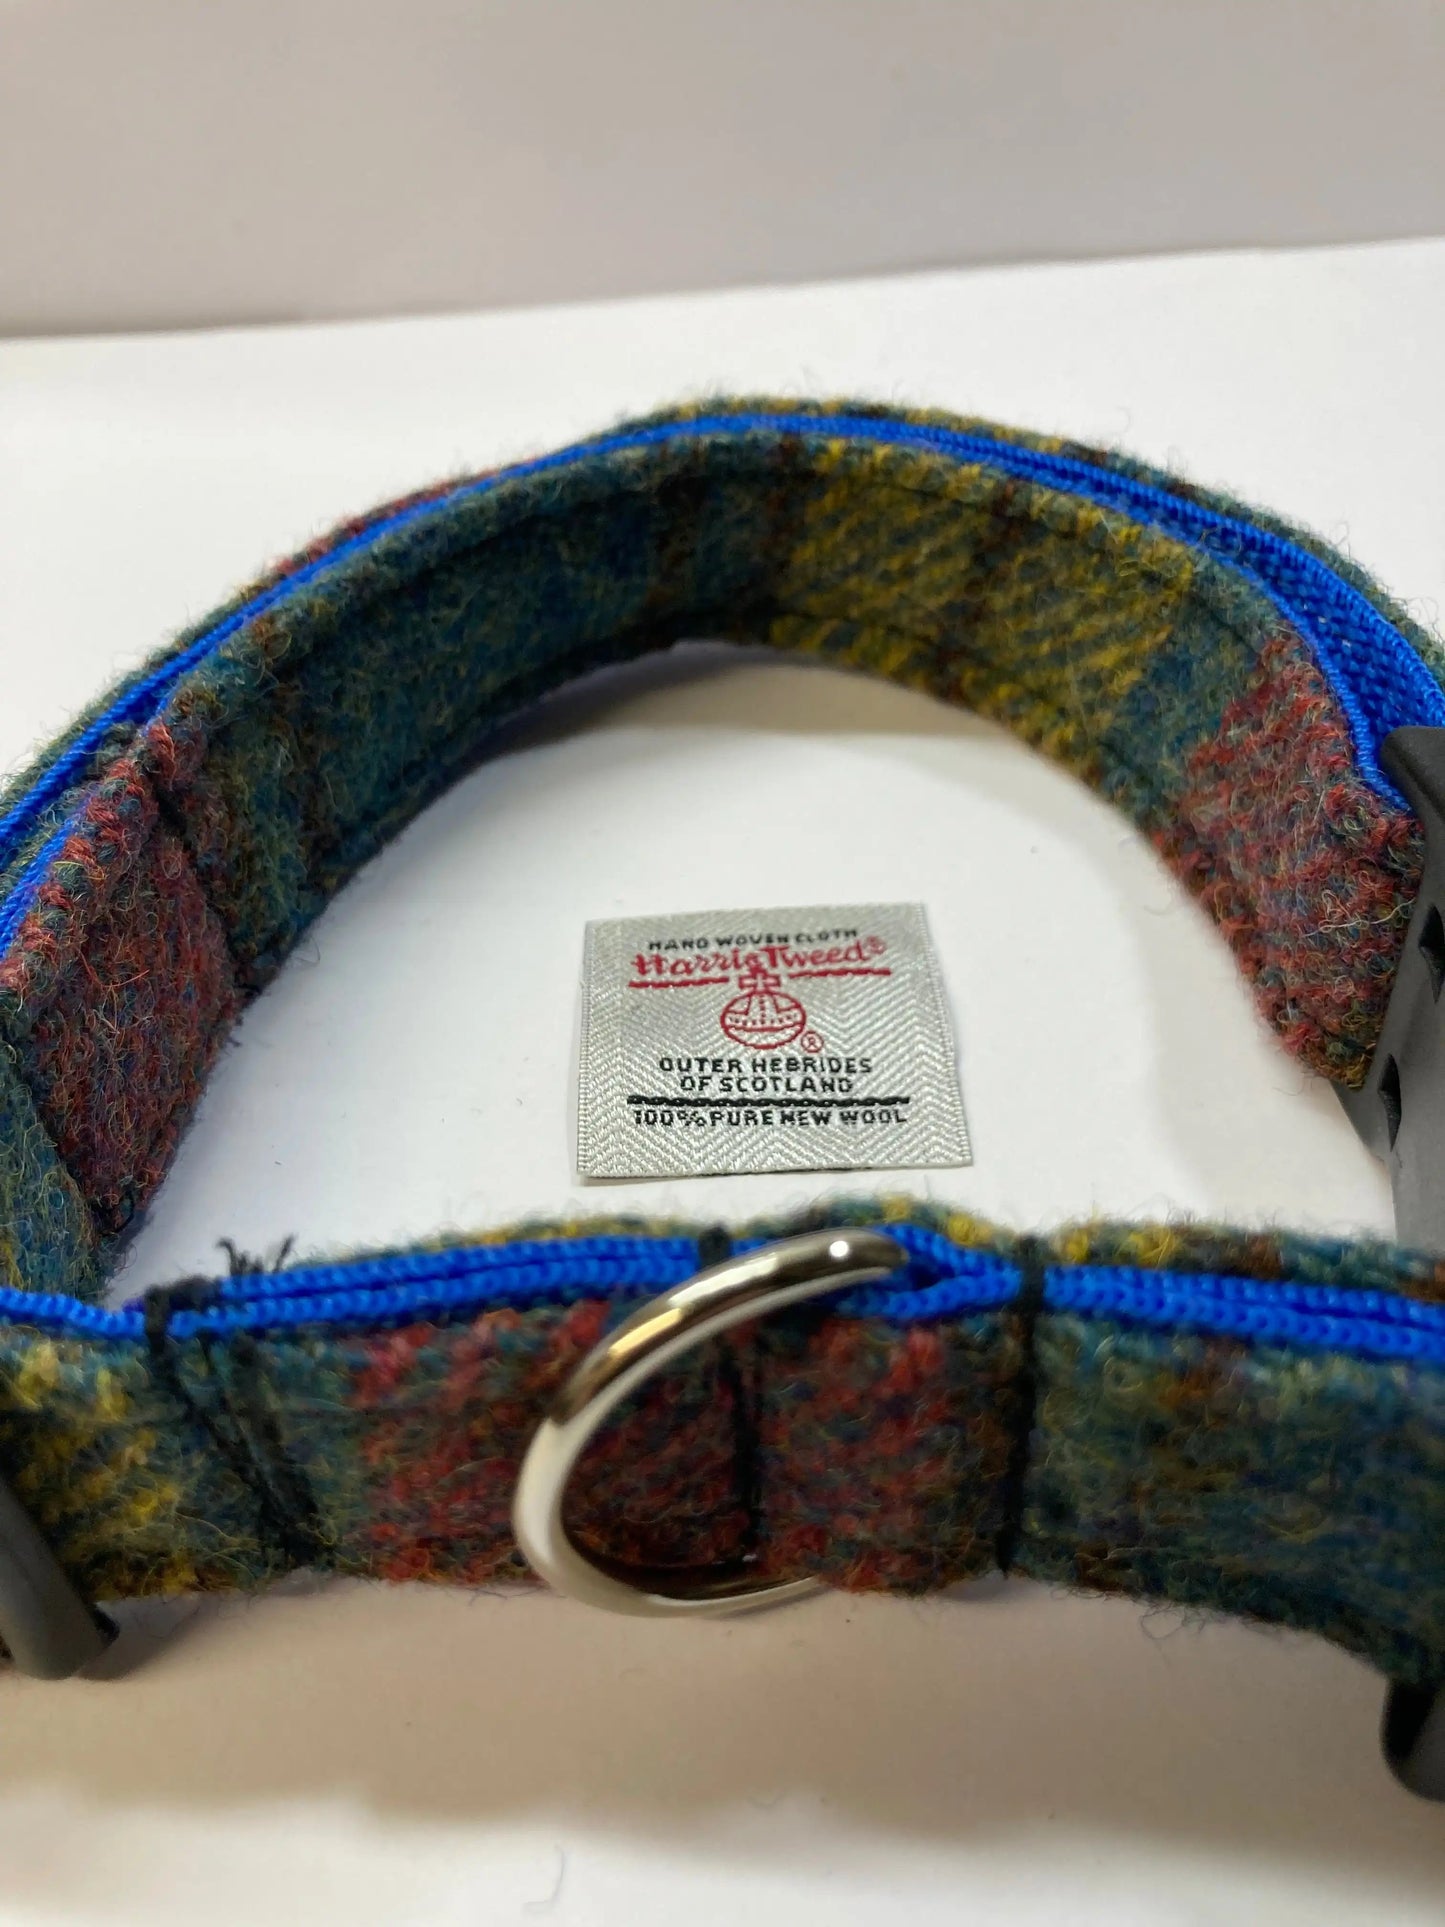 Harris Tweed Dog Collar Blue, Green ,Red check With Harris tweed label